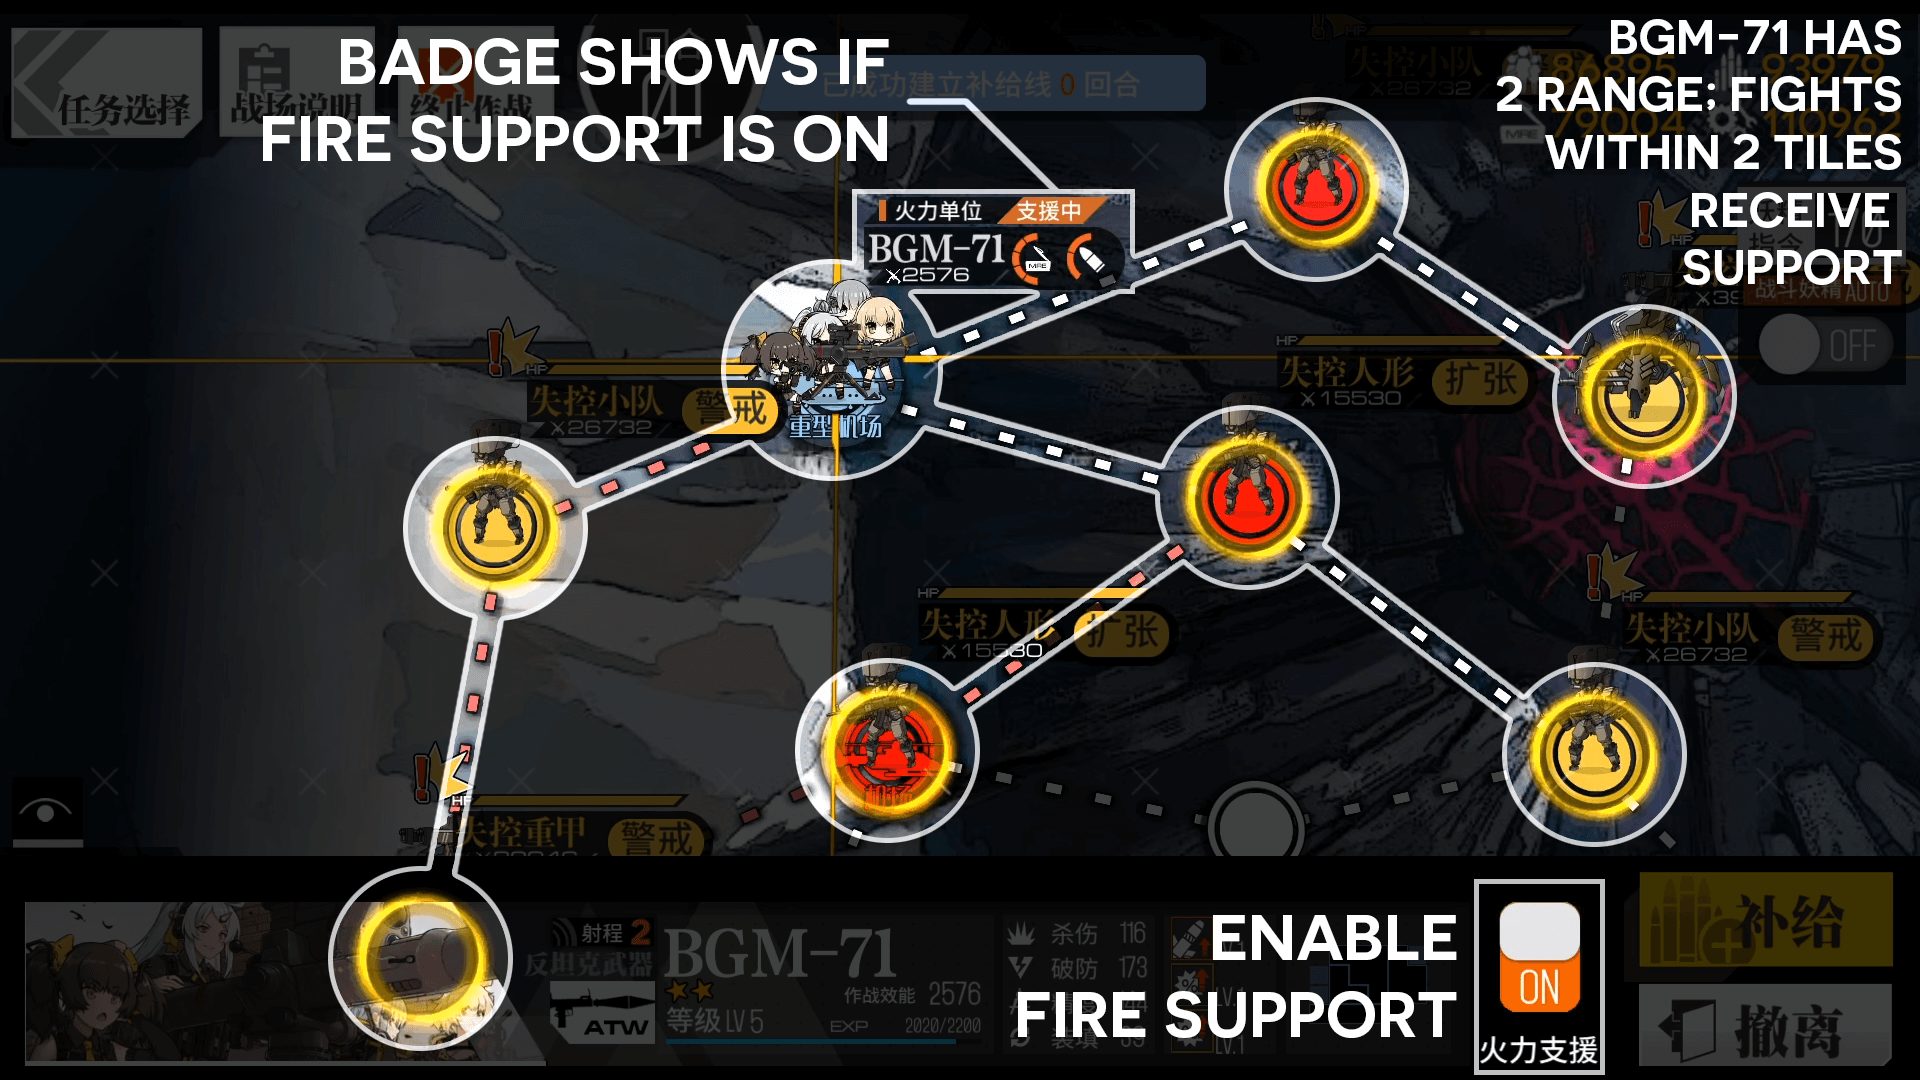 Indicator Infographic to show a HOC's "support range", or the distance at which they will provide fire support to allied echelons.